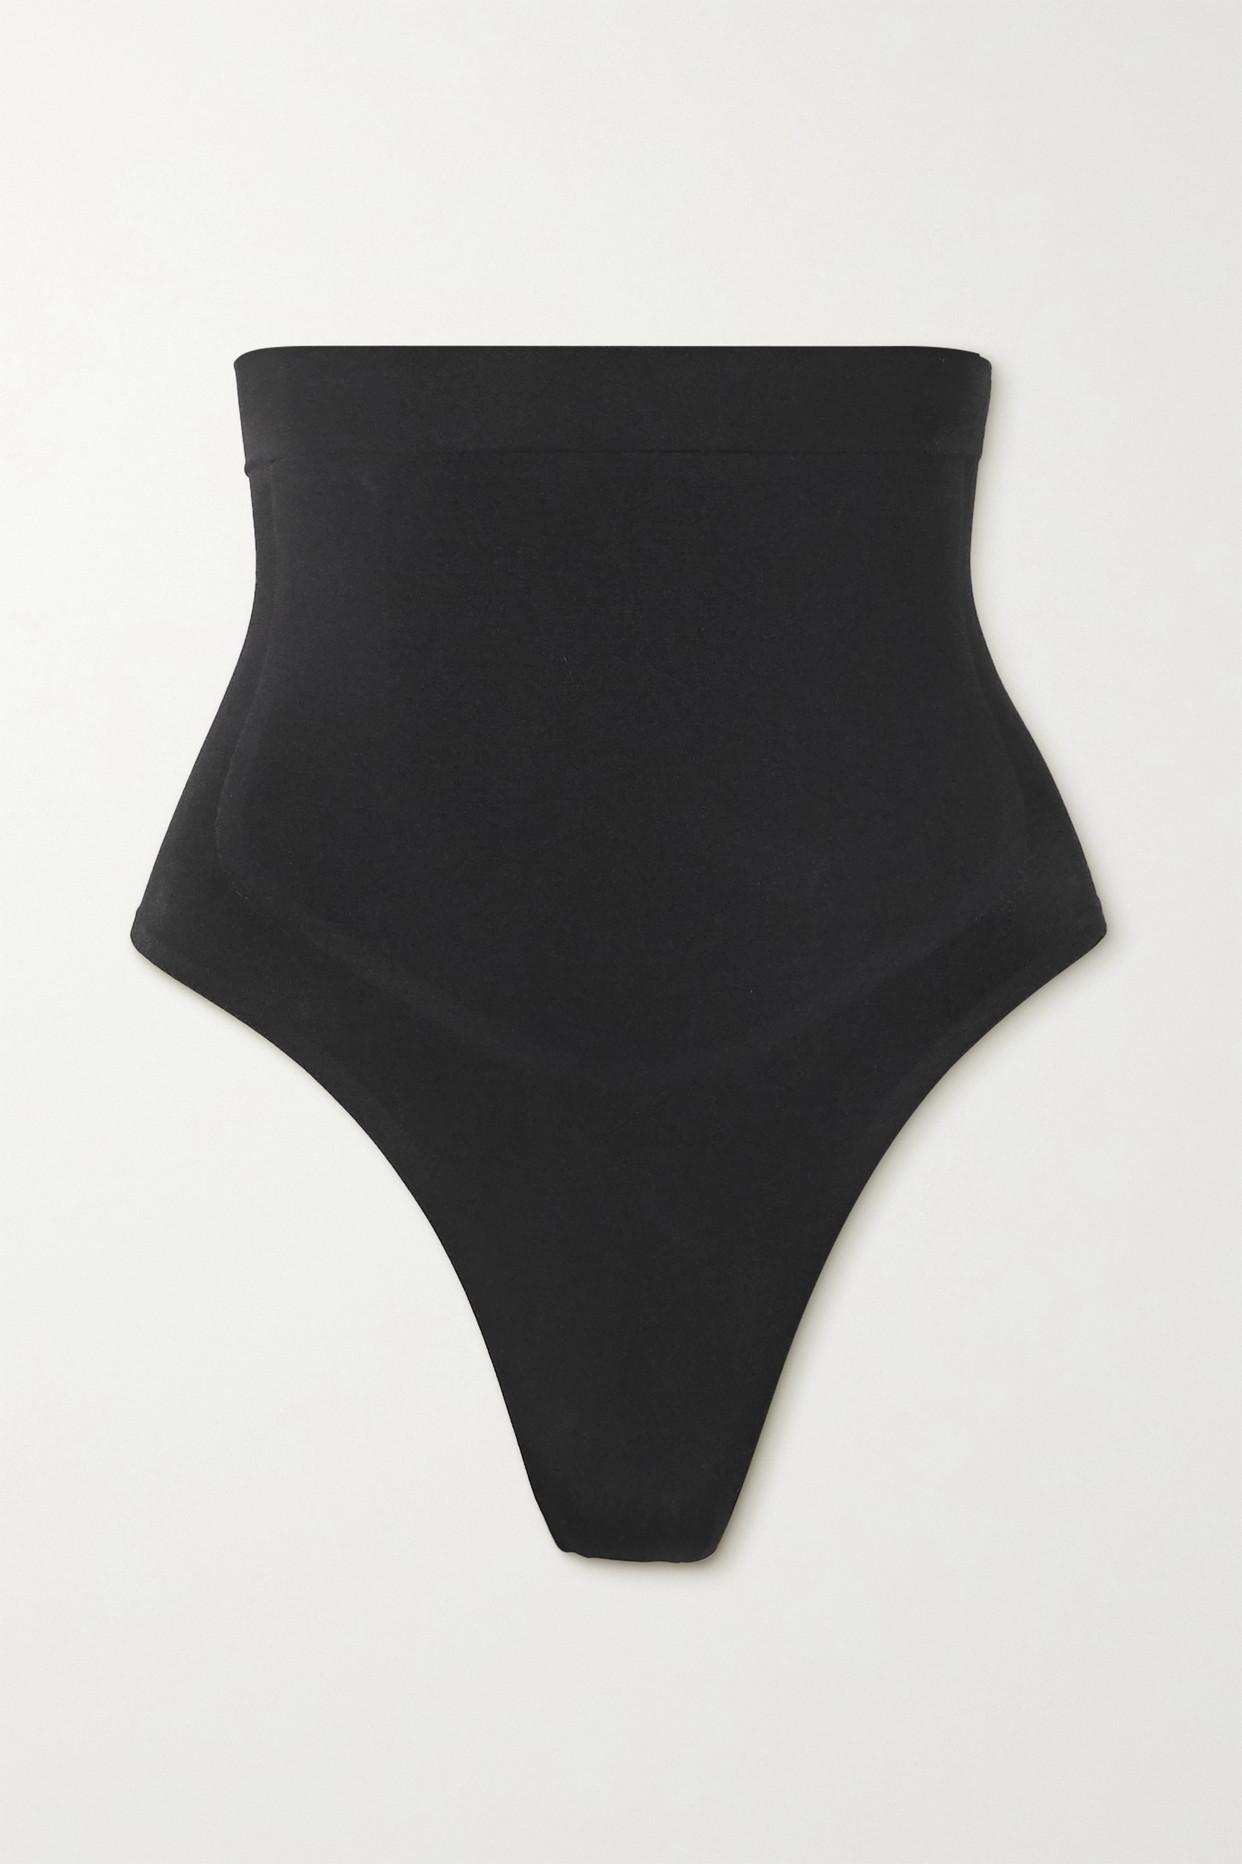 Skims Contour Bonded High Waisted Thong in Black